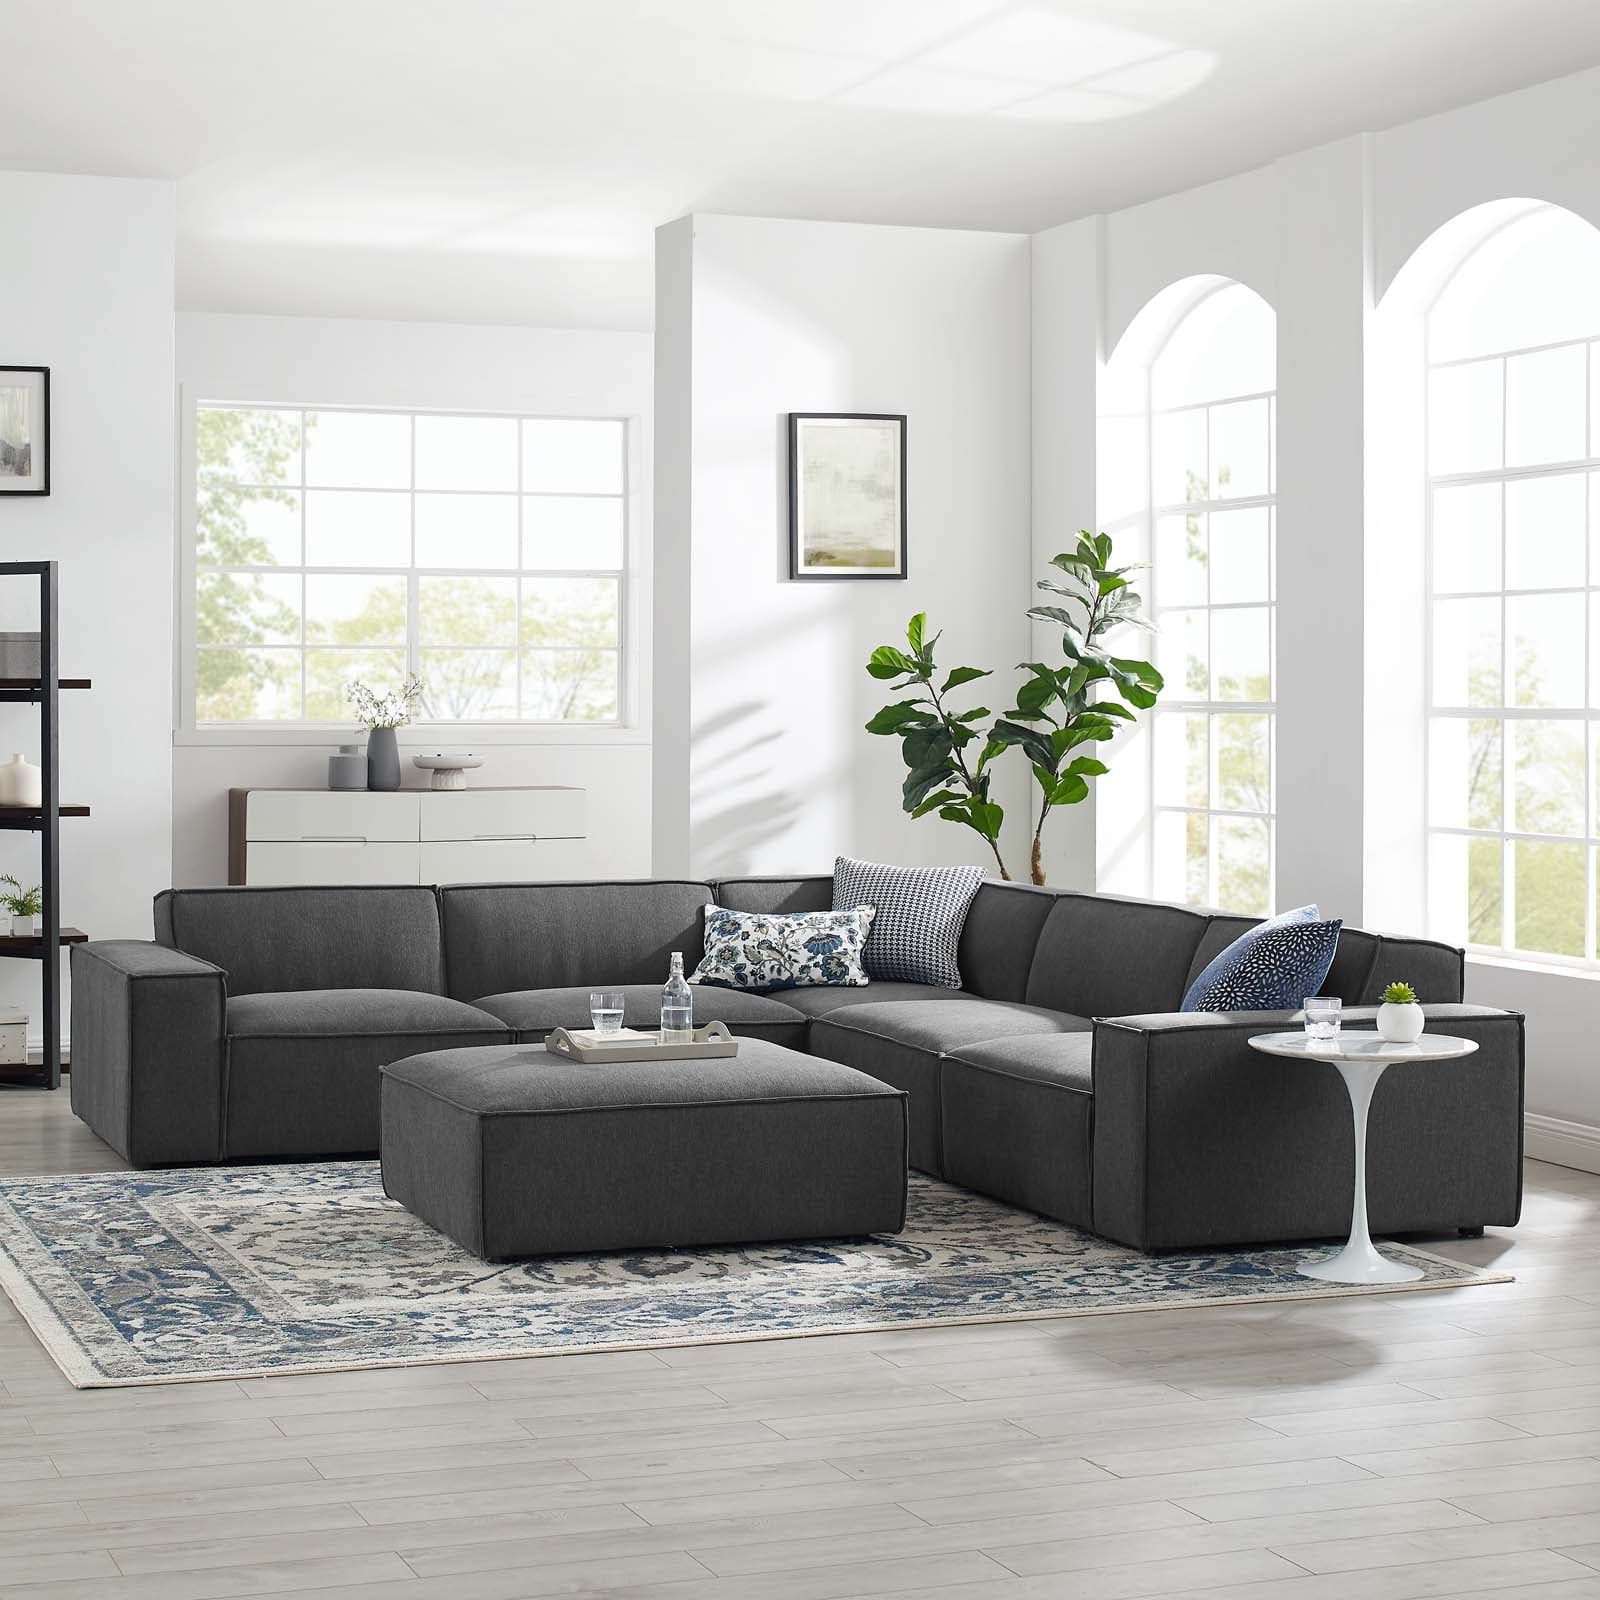 Newest Sofas In Multiple Colors Intended For Modway Restore 6 Piece Sectional Sofa, Multiple Colors – Walmart (Photo 4 of 15)